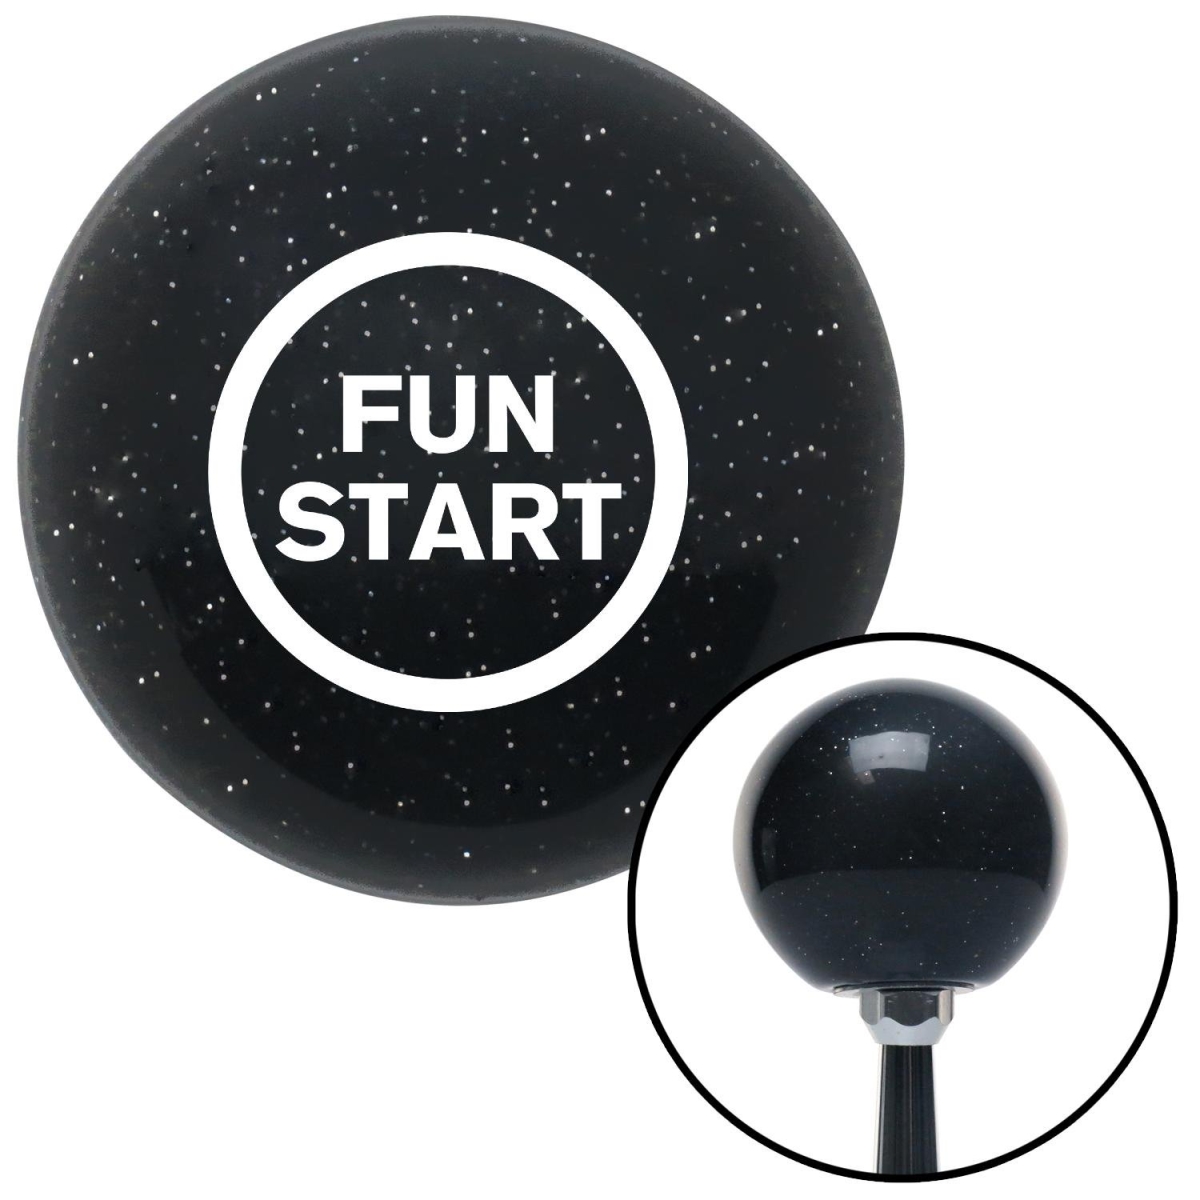 Picture of American Shifter 75423 White Fun Start Black Metal Flake Shift Knob with M16 x 1.5 Insert Shifter Auto Brody